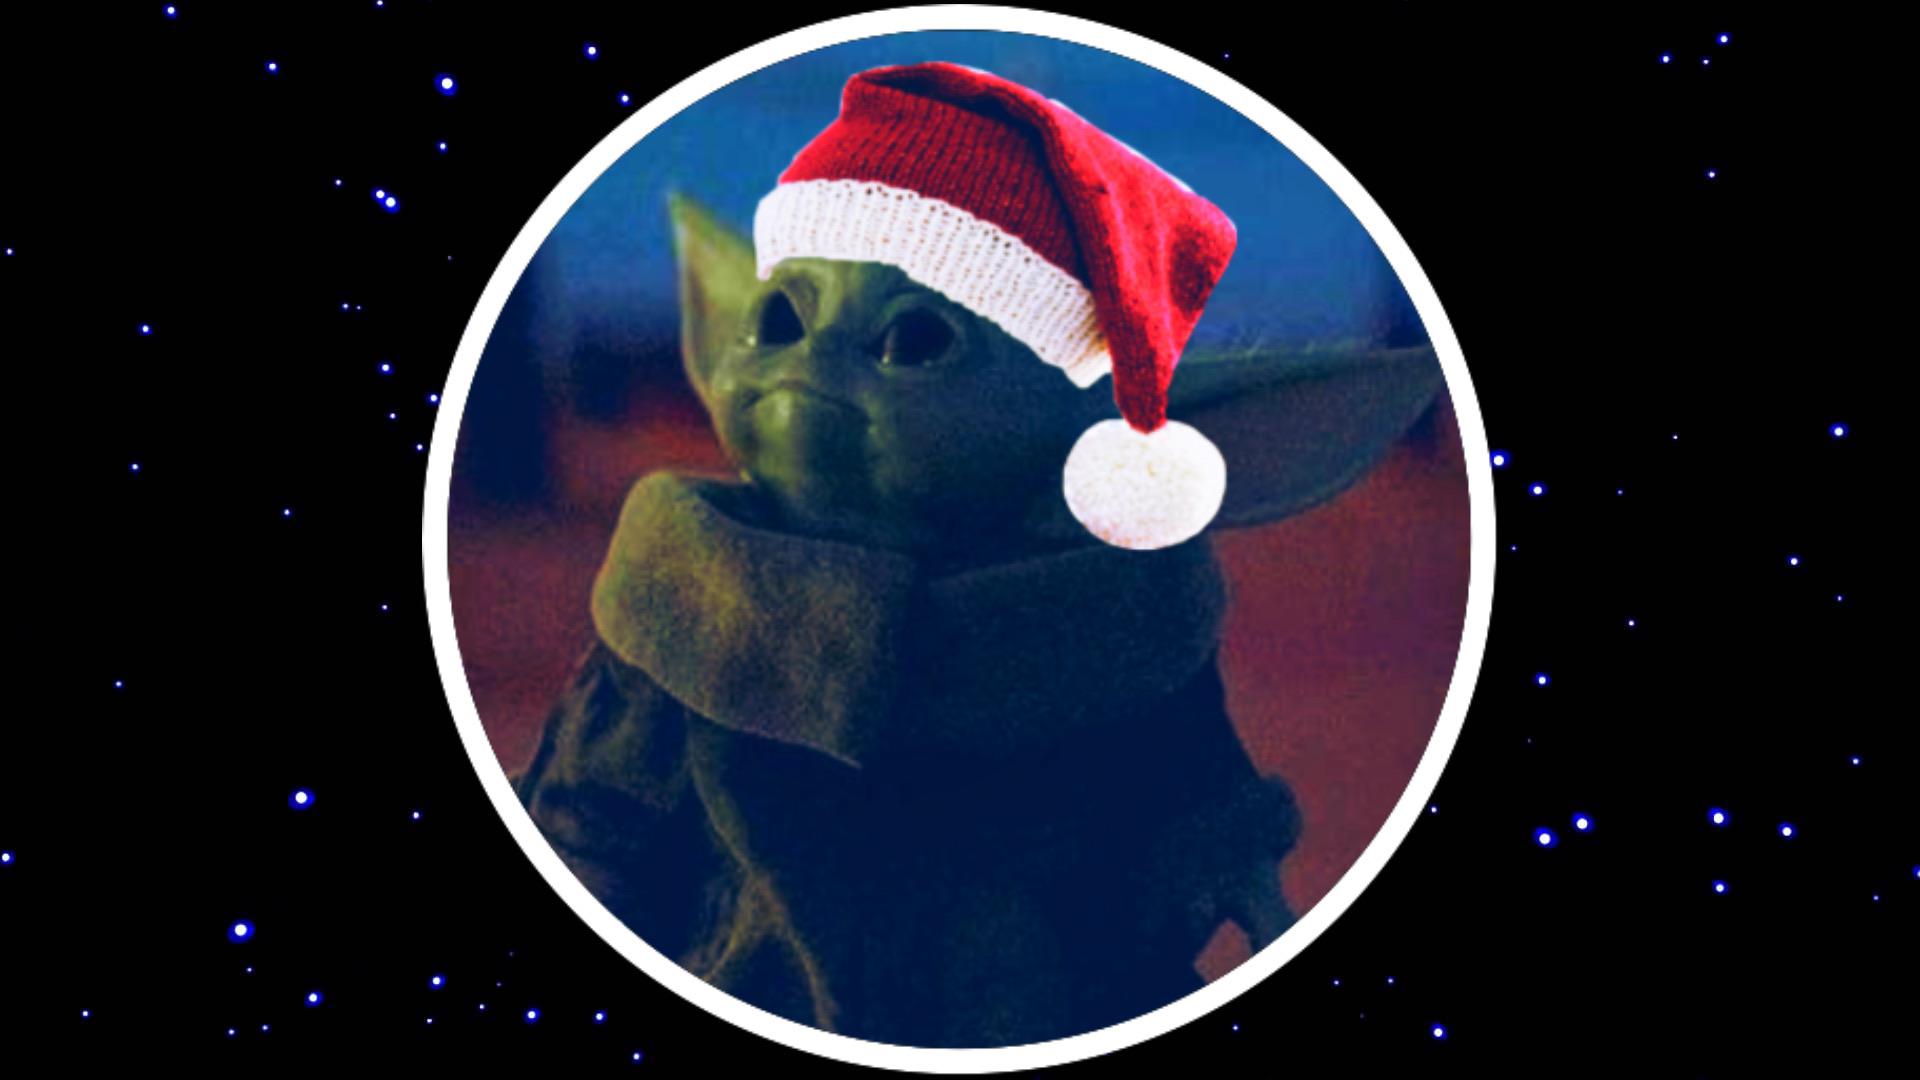 Baby Yoda Wishes you a Merry Christmas!